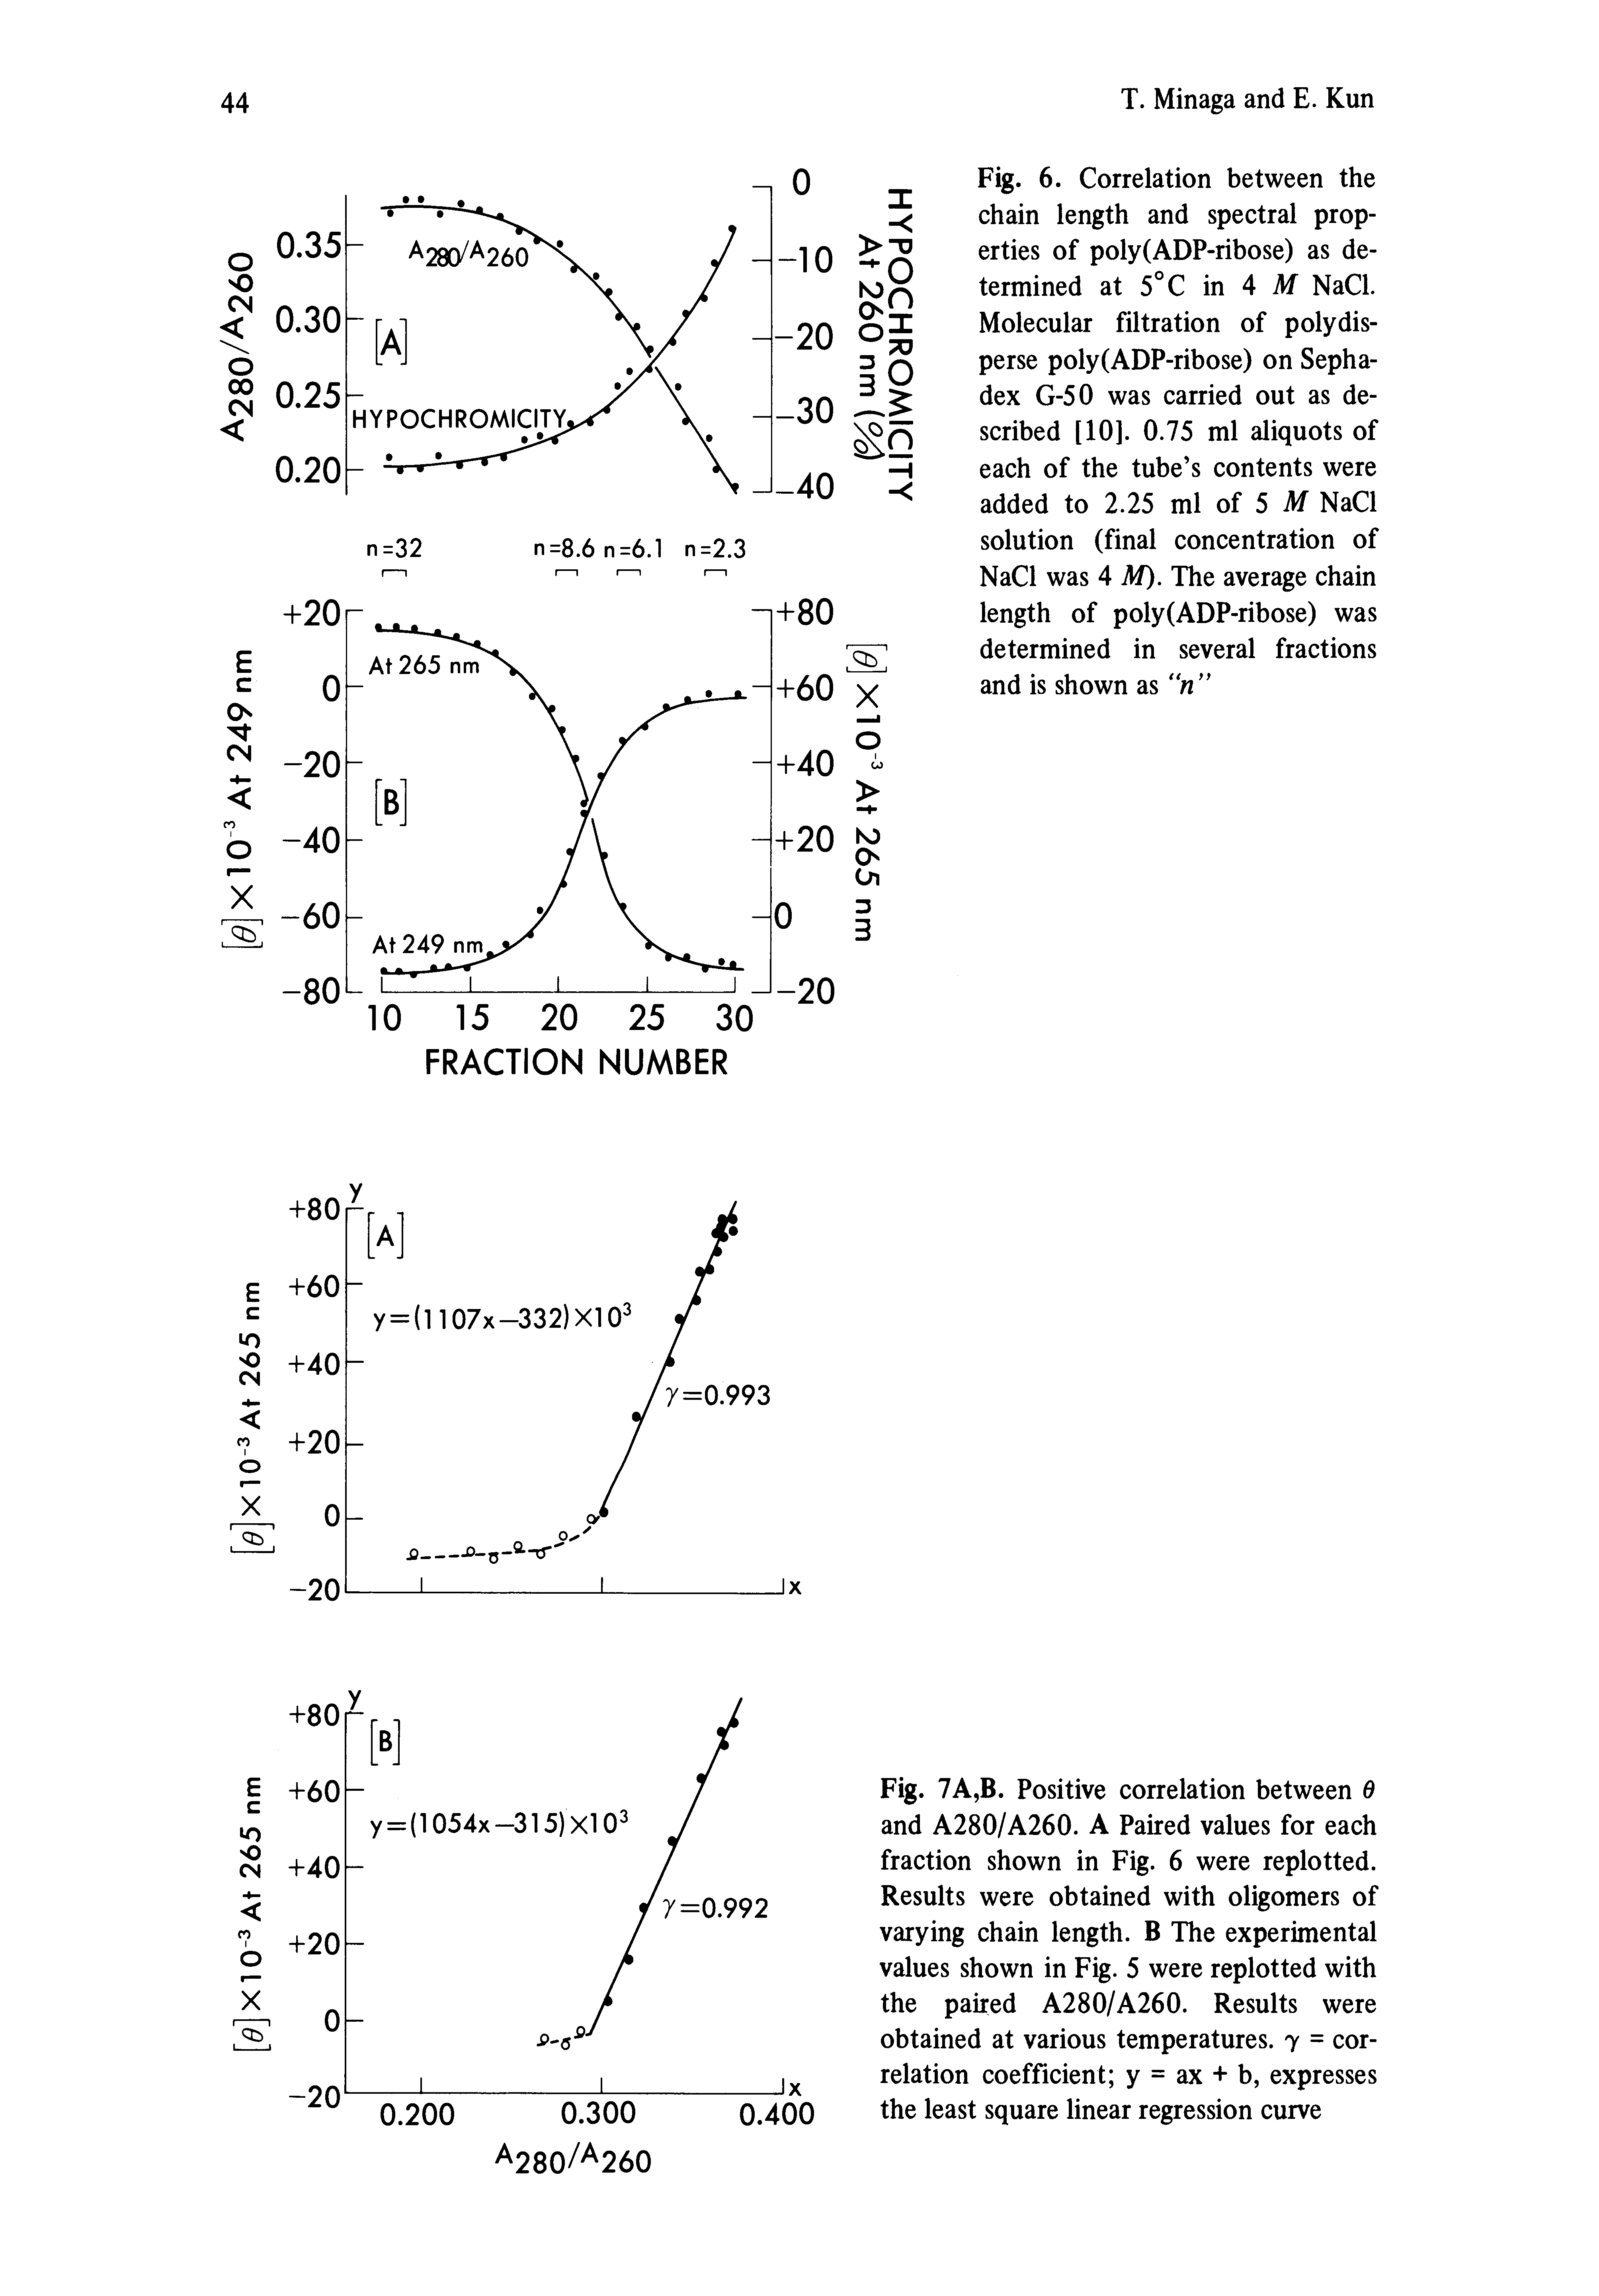 Fig. 6. Correlation between the chain length and spectral properties of poly(ADP-ribose) as determined at 5°C in 4 Af NaCl. Molecular filtration of polydis-perse poly(ADP-ribose) on Sepha-dex G-50 was carried out as described [10]. 0.75 ml aliquots of each of the tube s contents were added to 2.25 ml of 5 M NaCl solution (final concentration of NaCl was 4 M). The average chain length of poly(ADP-ribose) was determined in several fractions and is shown as...